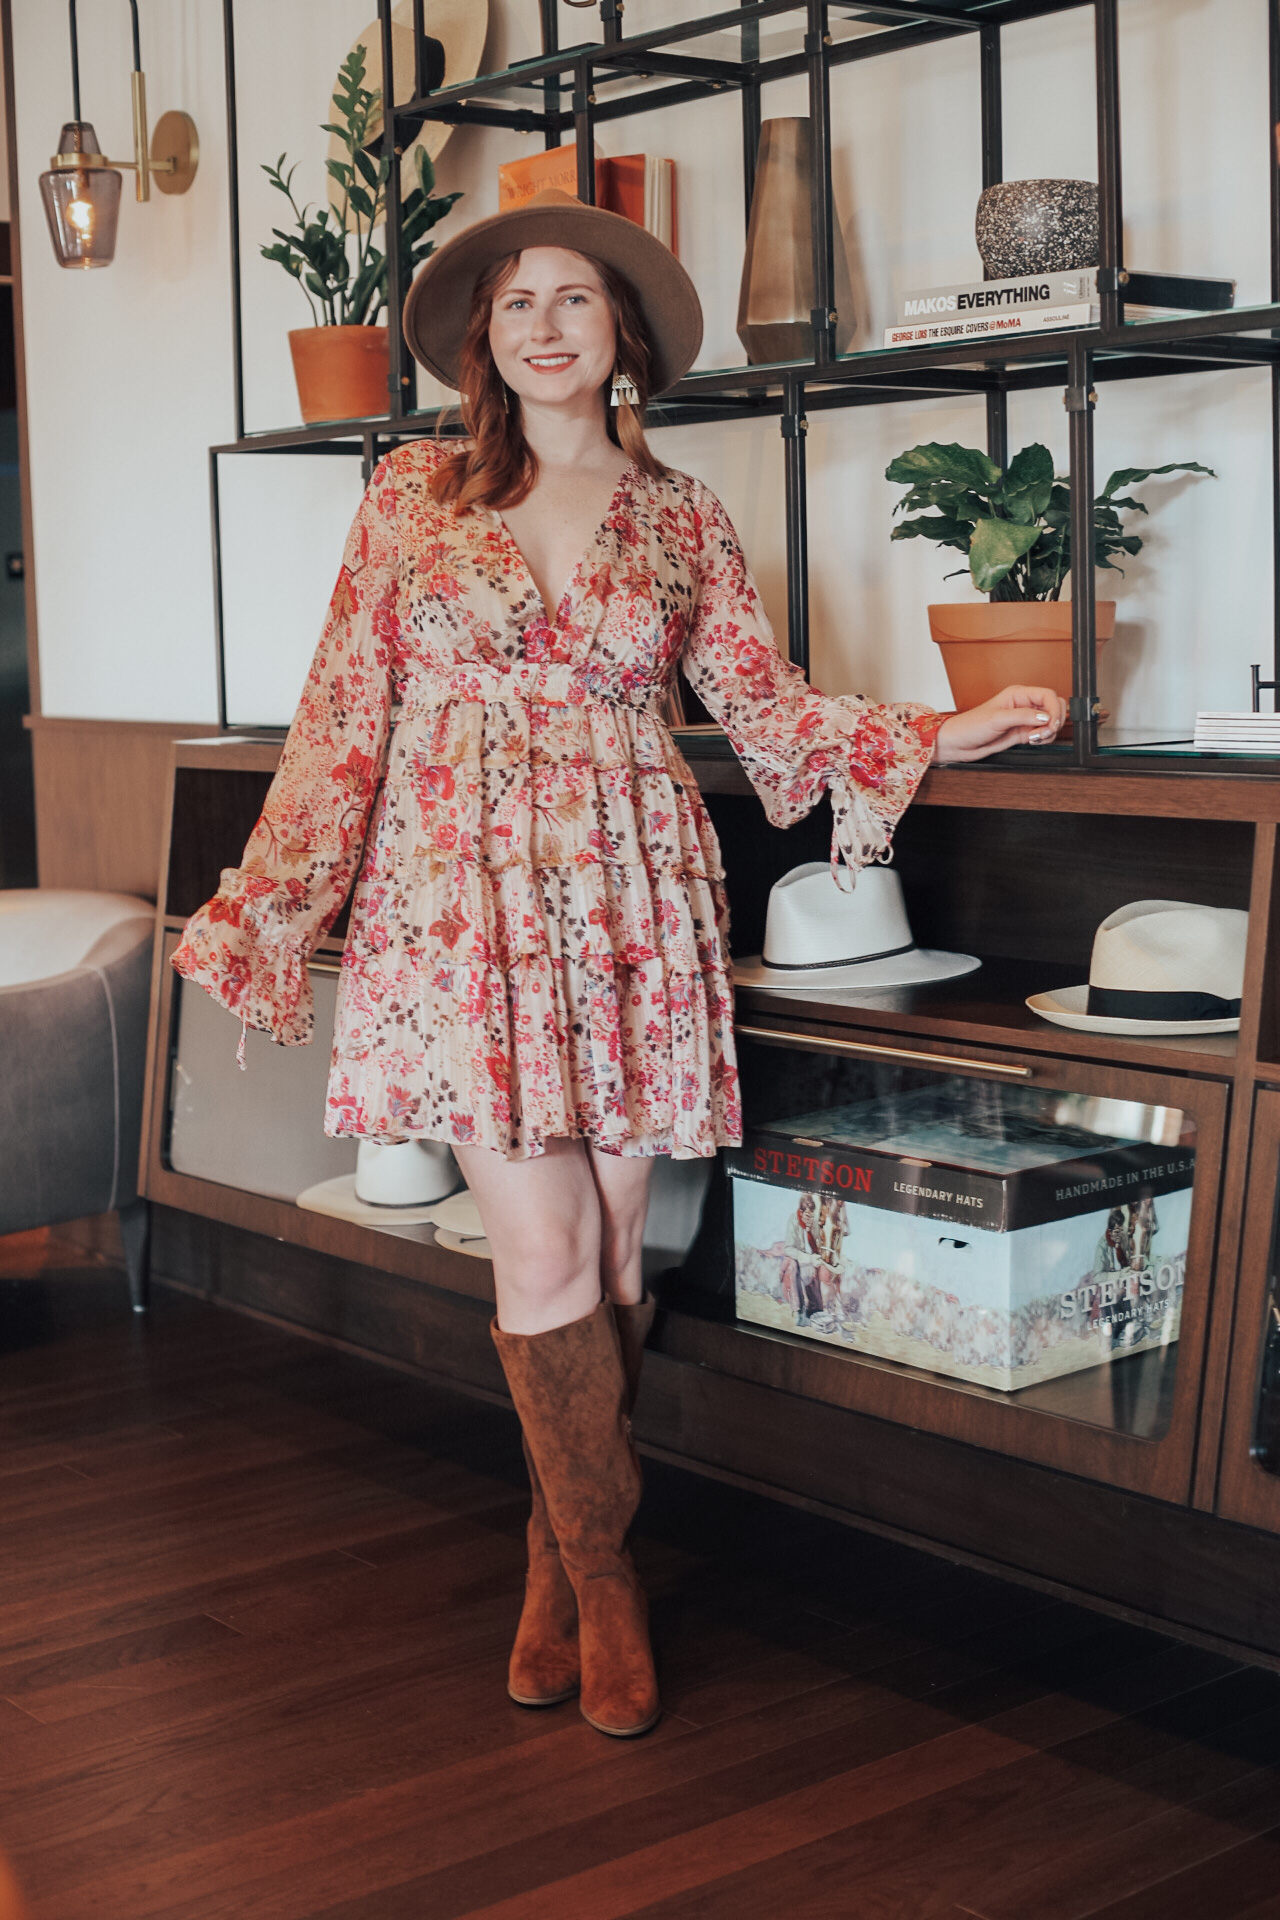 48 Hours in Savannah: Hotel Review The Alida Hotel. Amanda Burrows of Affordable by Amanda wears a floral Free People dress inside the Alida Hotel in Savannah, Georgia.